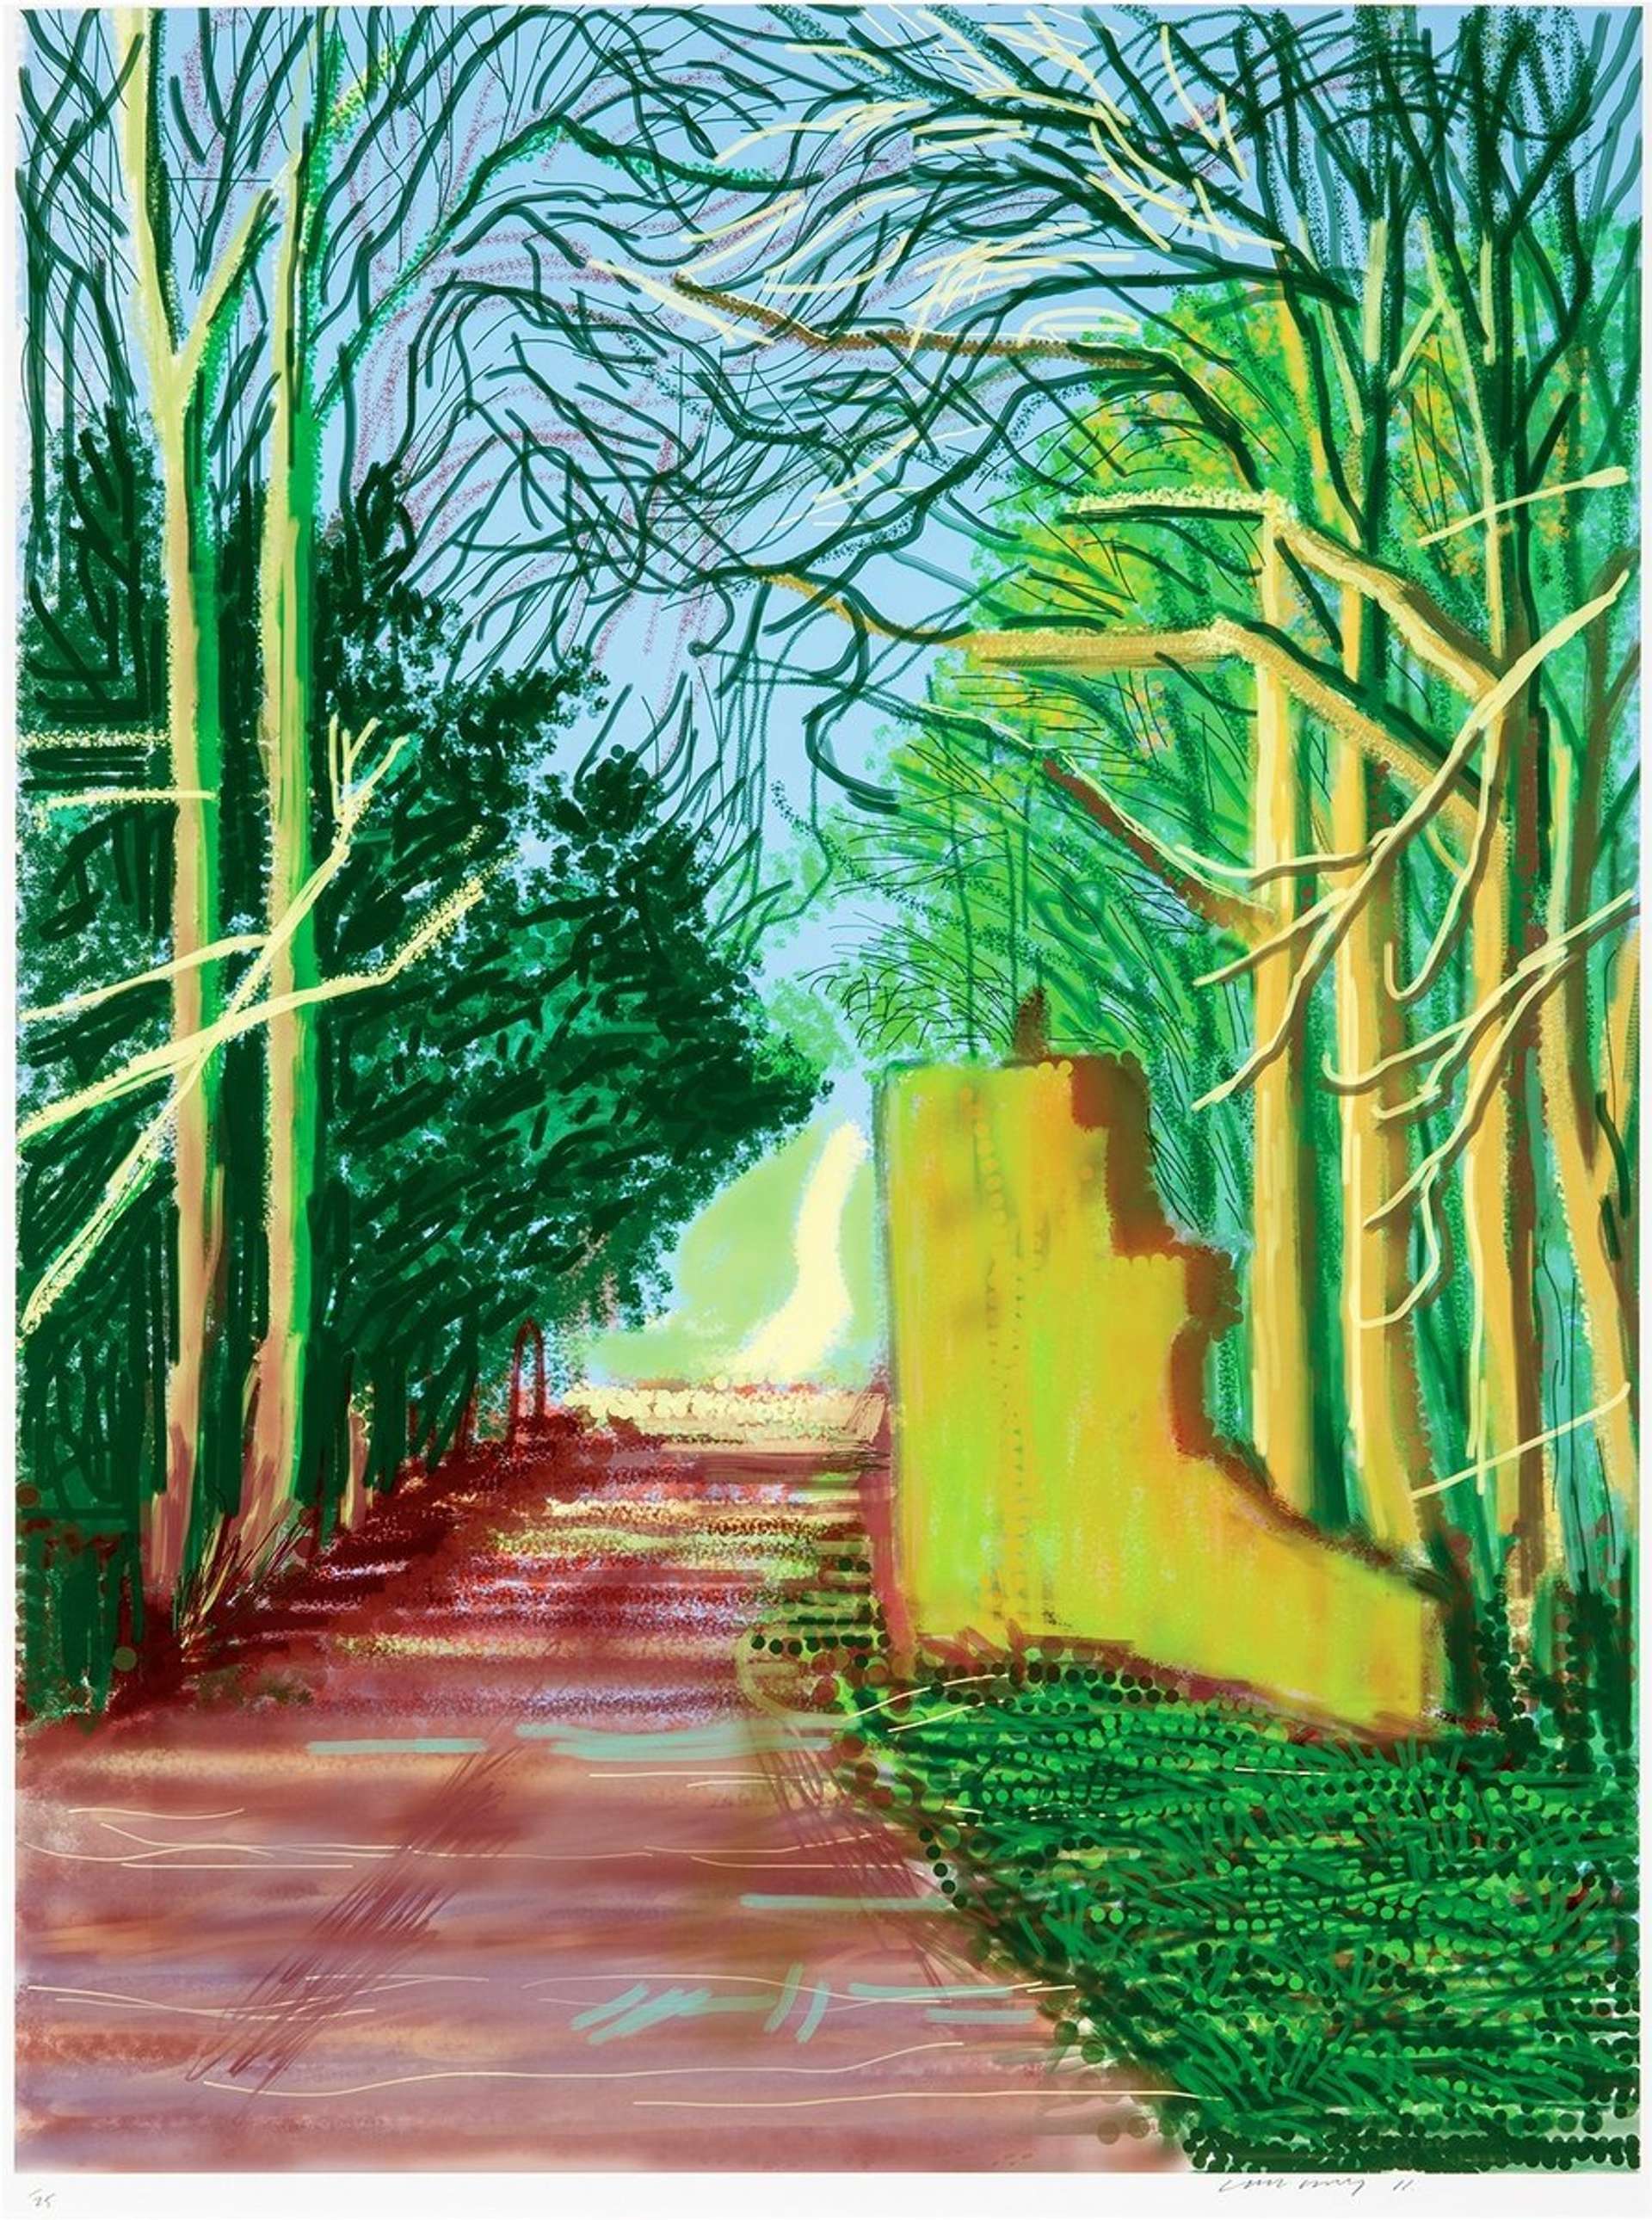 The Arrival Of Spring In Woldgate East Yorkshire 19 March 2011 by David Hockney